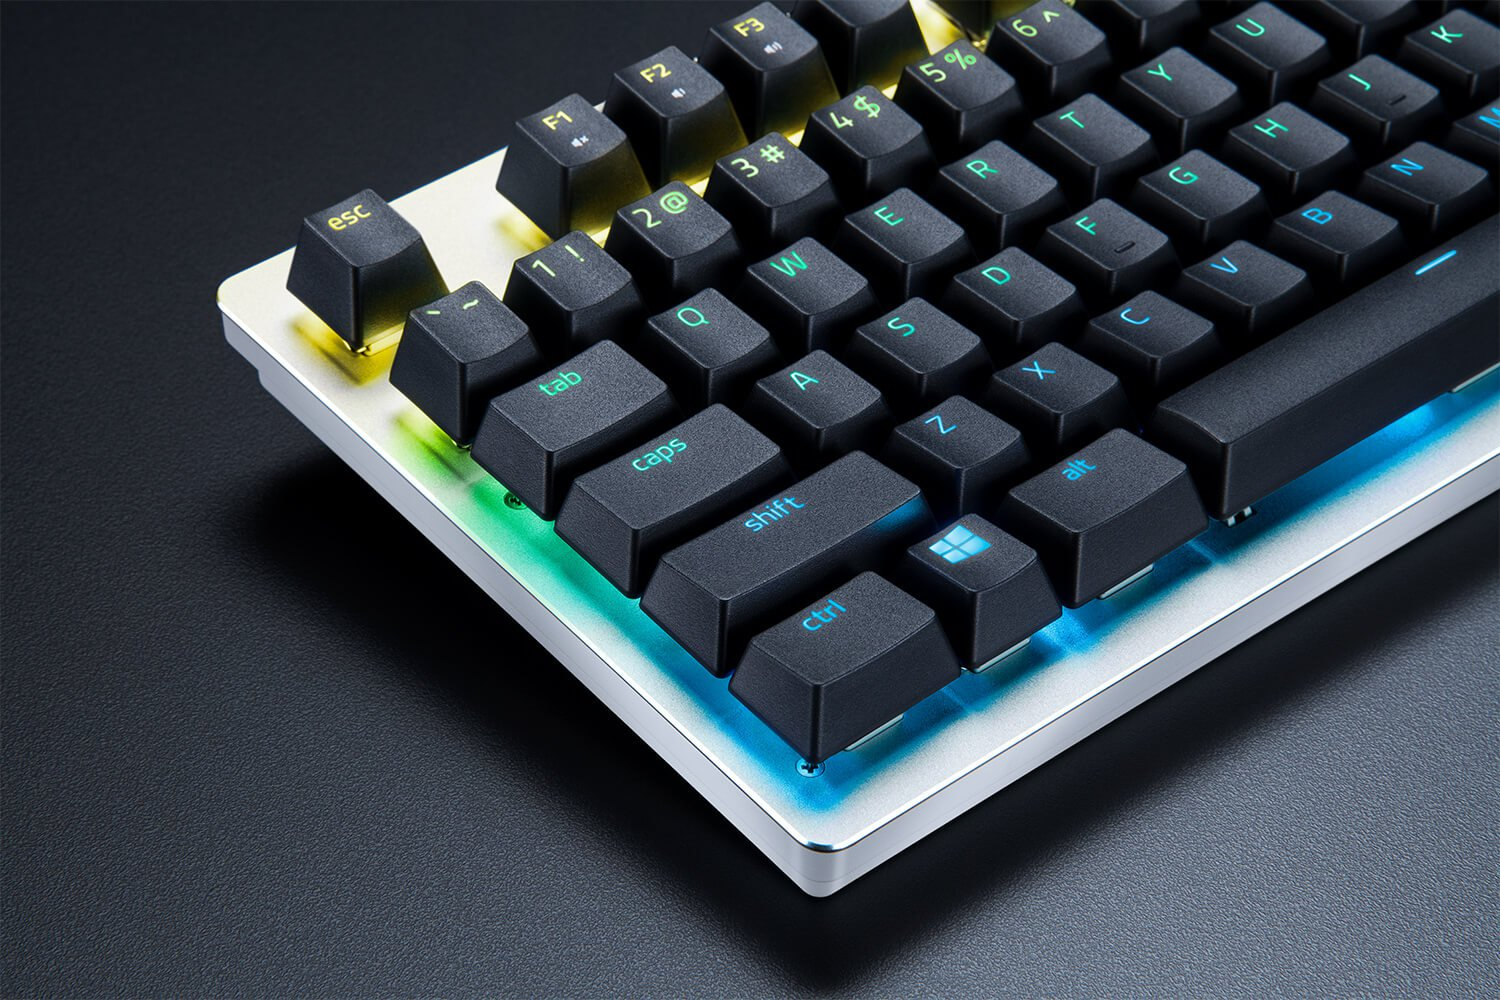 Gaming keyboards that are manufactured using PBT are more expensive but have advantages such as better durability.